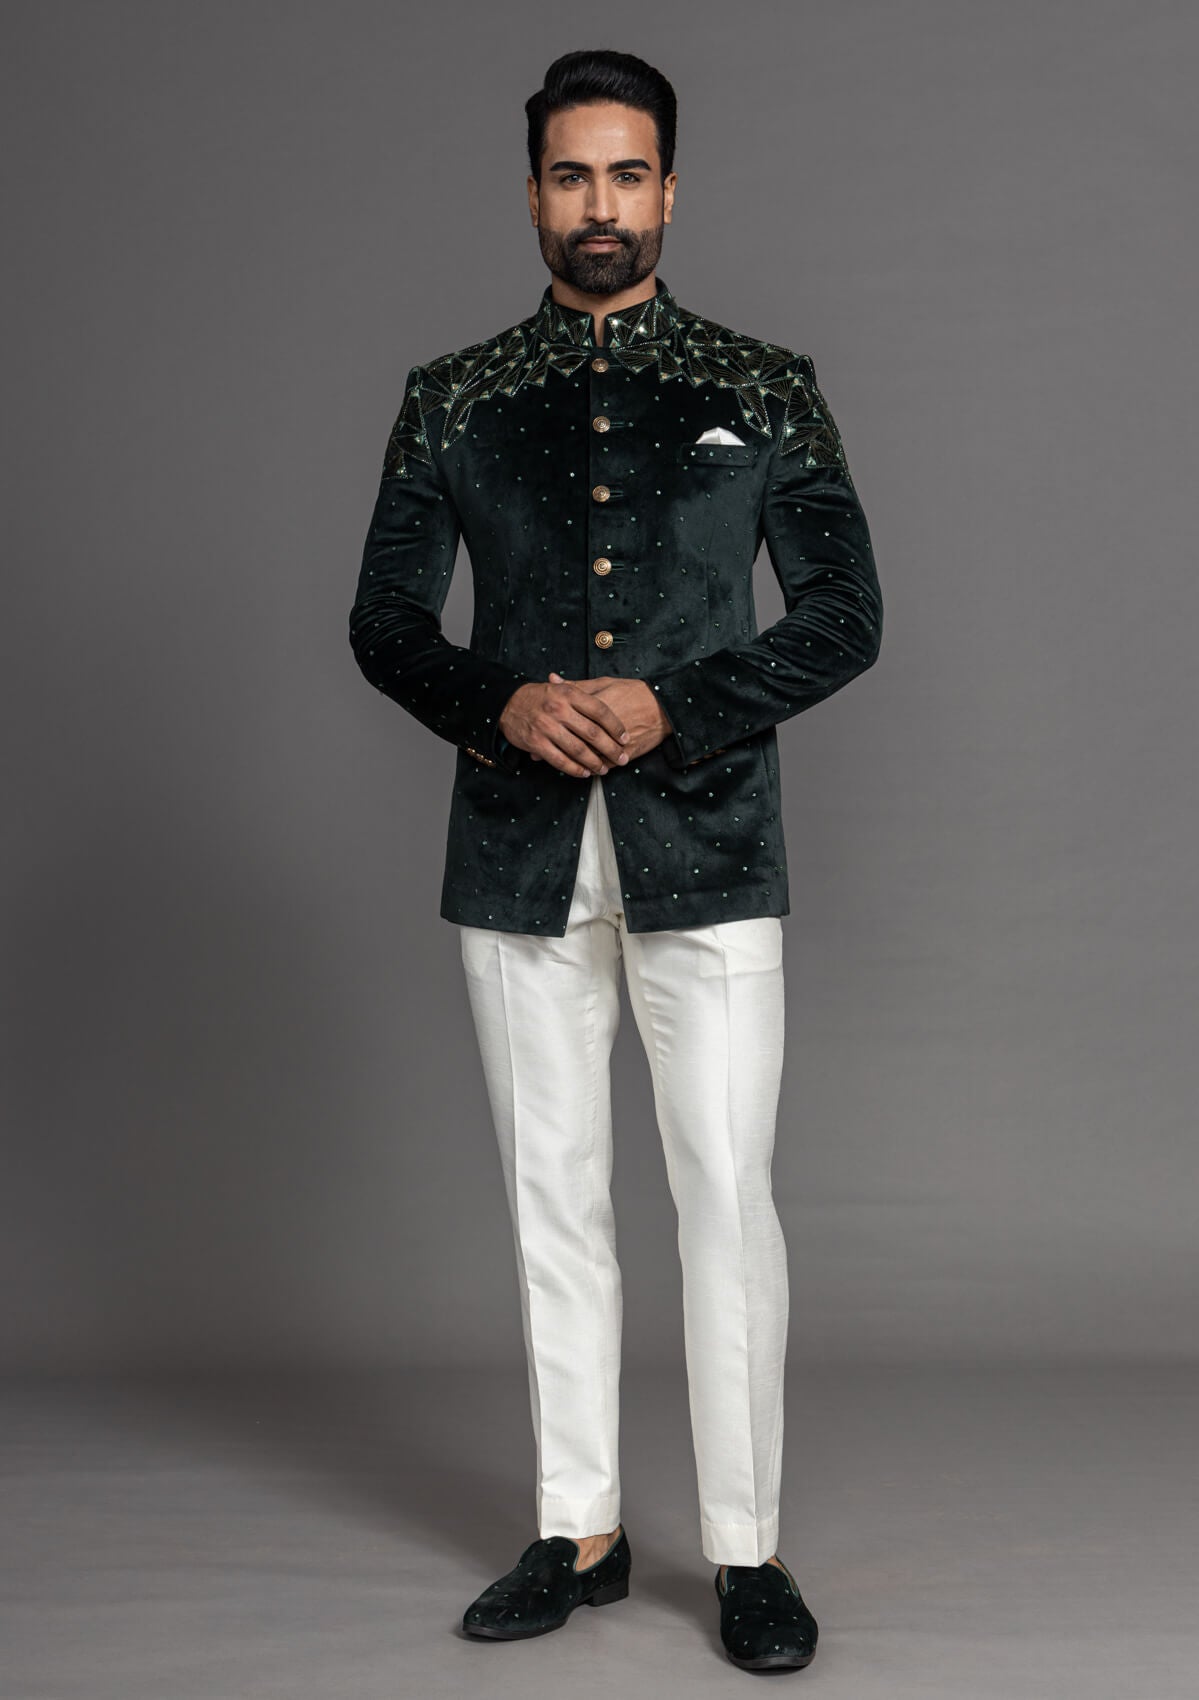 Bandhgala suit with intricate embroidery